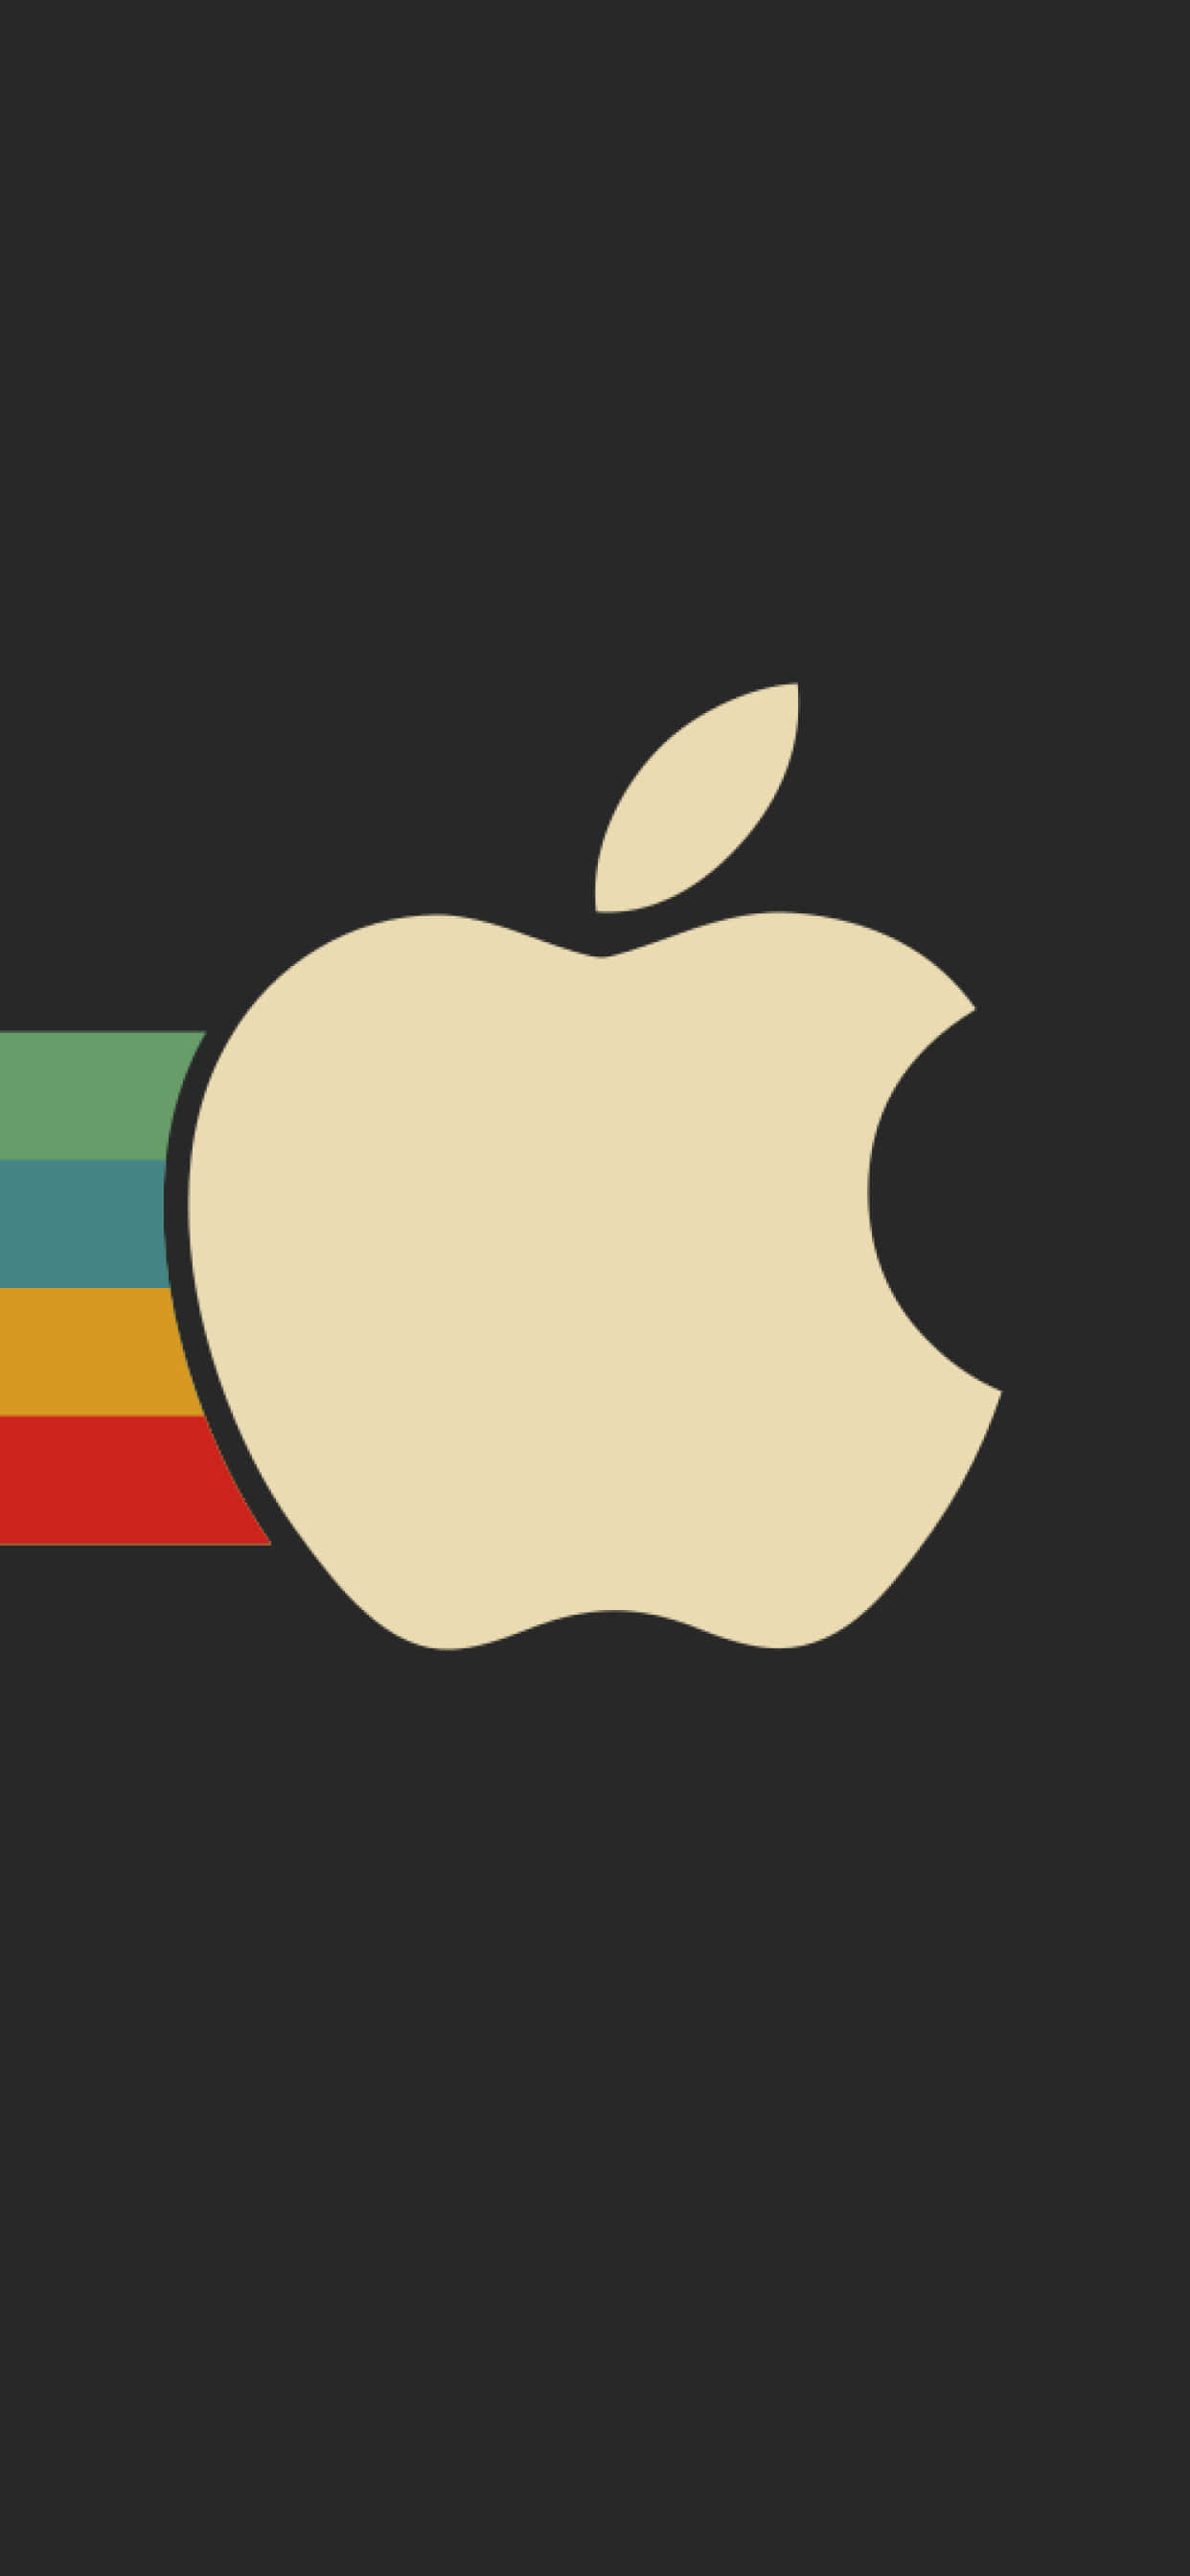 Download Apple Pictures | Wallpapers.com